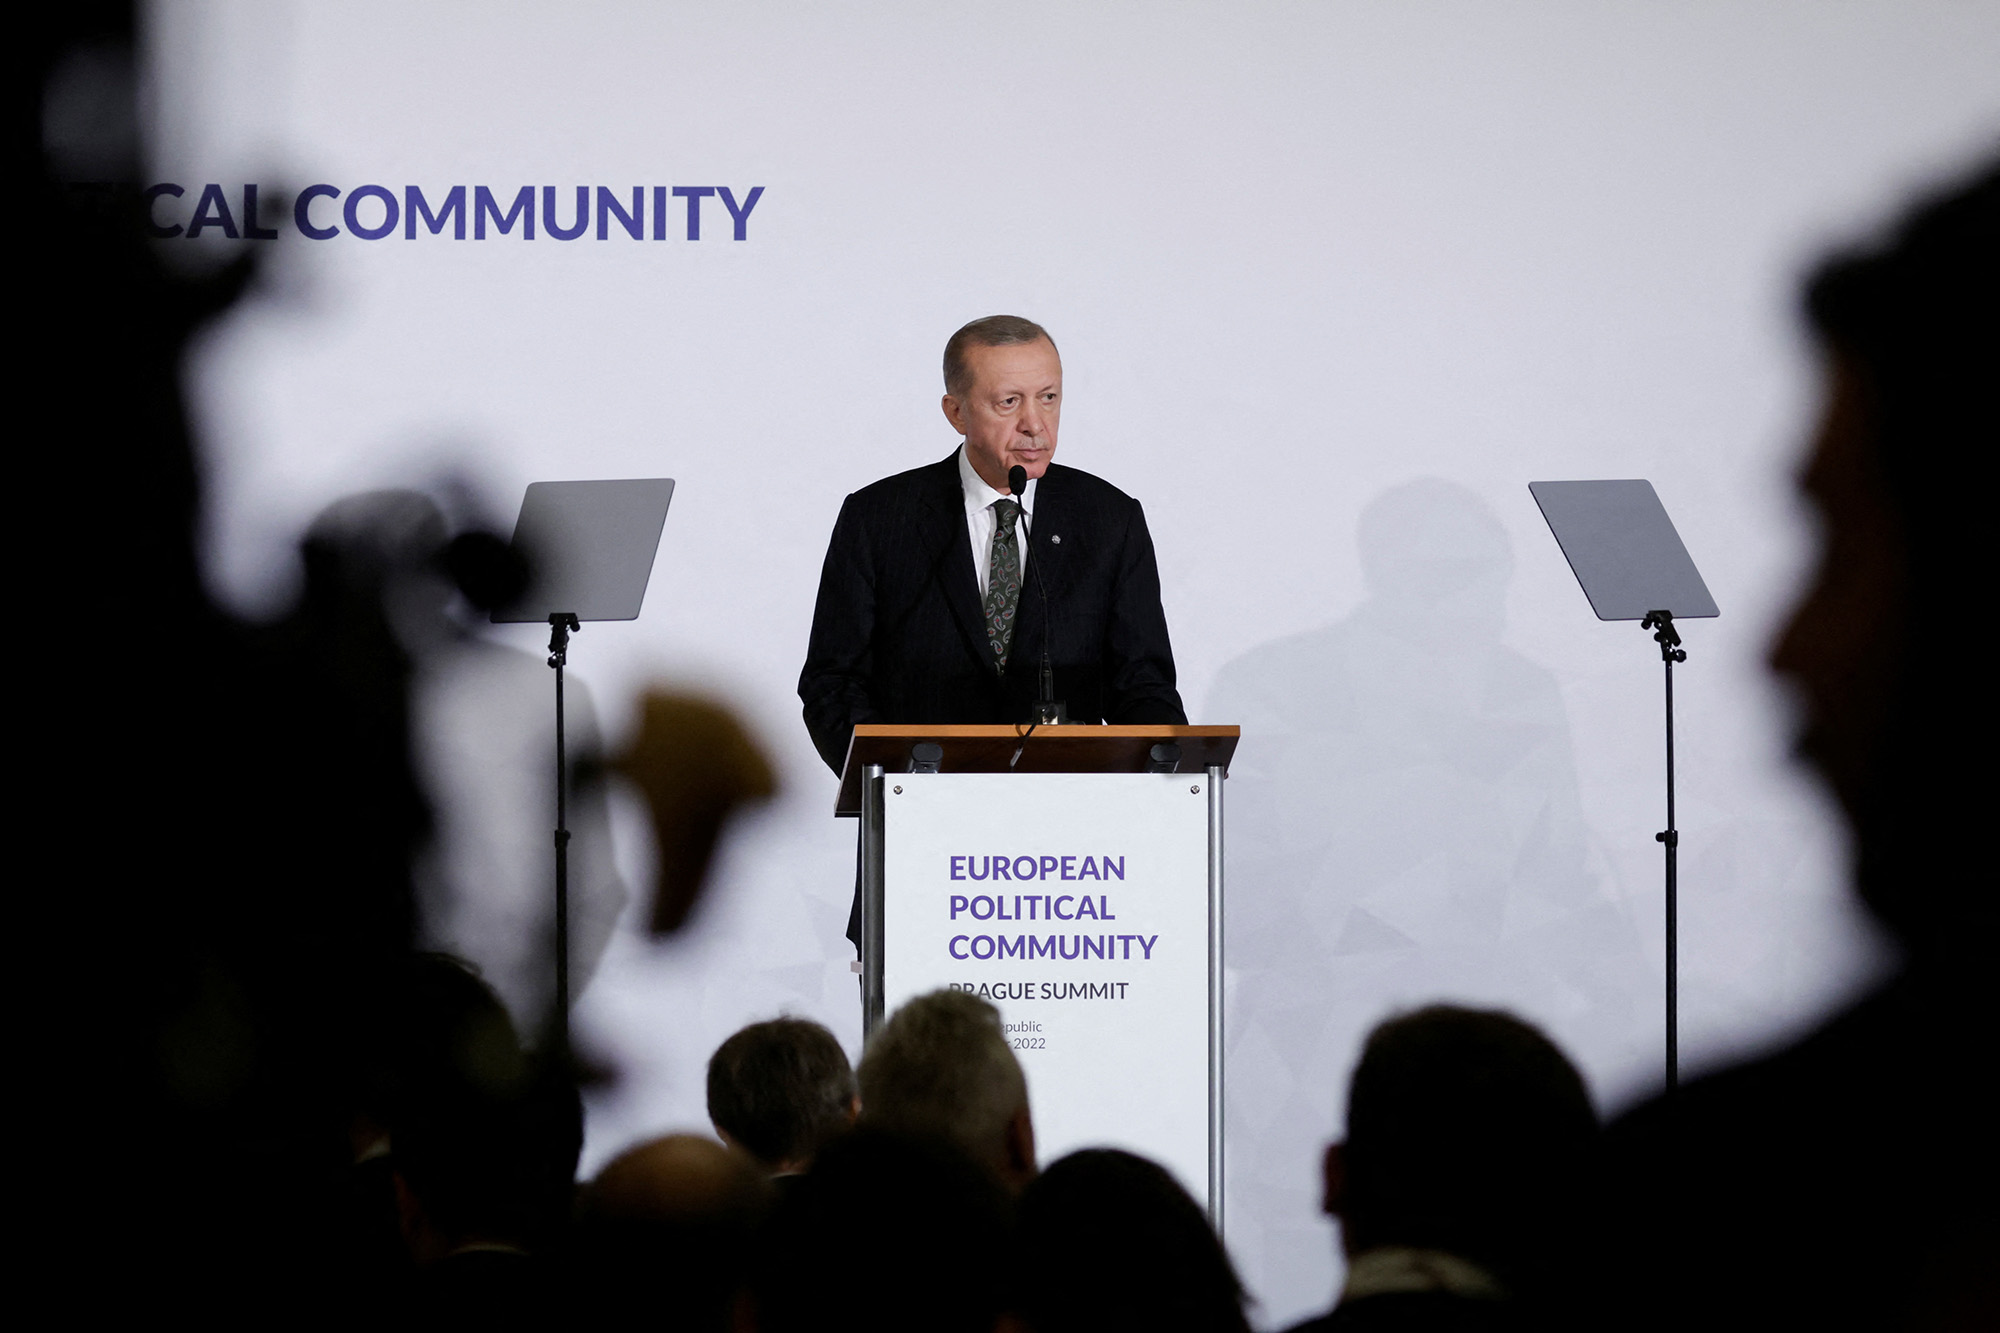 Turkey's President Tayyip Erdogan attends a news conference during the Informal EU 27 Summit and Meeting within the European Political Community at Prague Castle, Czech Republic, on October 6.